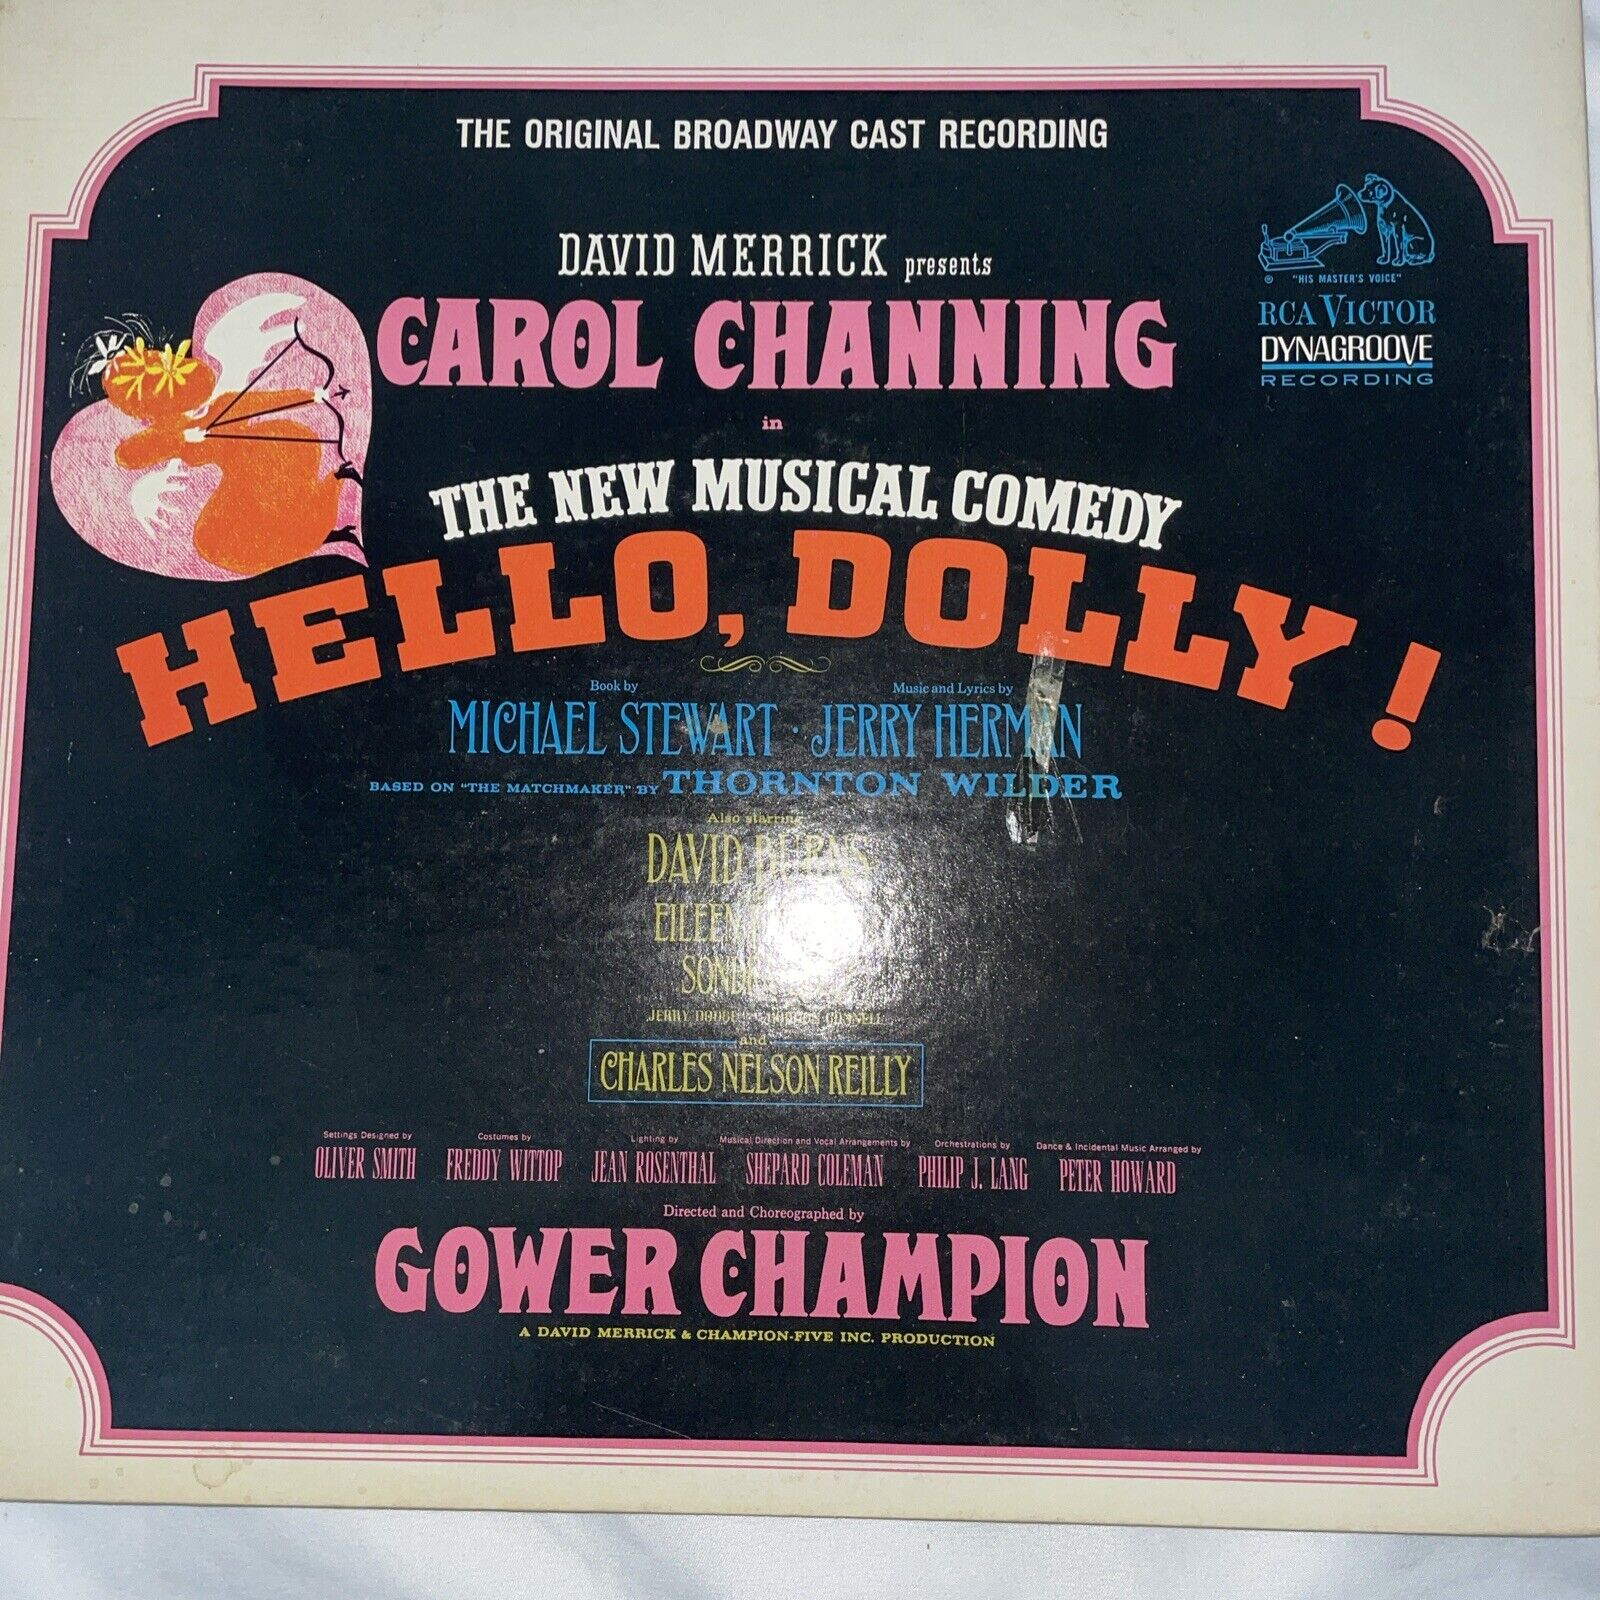 HELLO, DOLLY LSOD- 1087 LP VINYL RECORD - RCA VICTOR EXCELLENT Carol Channing